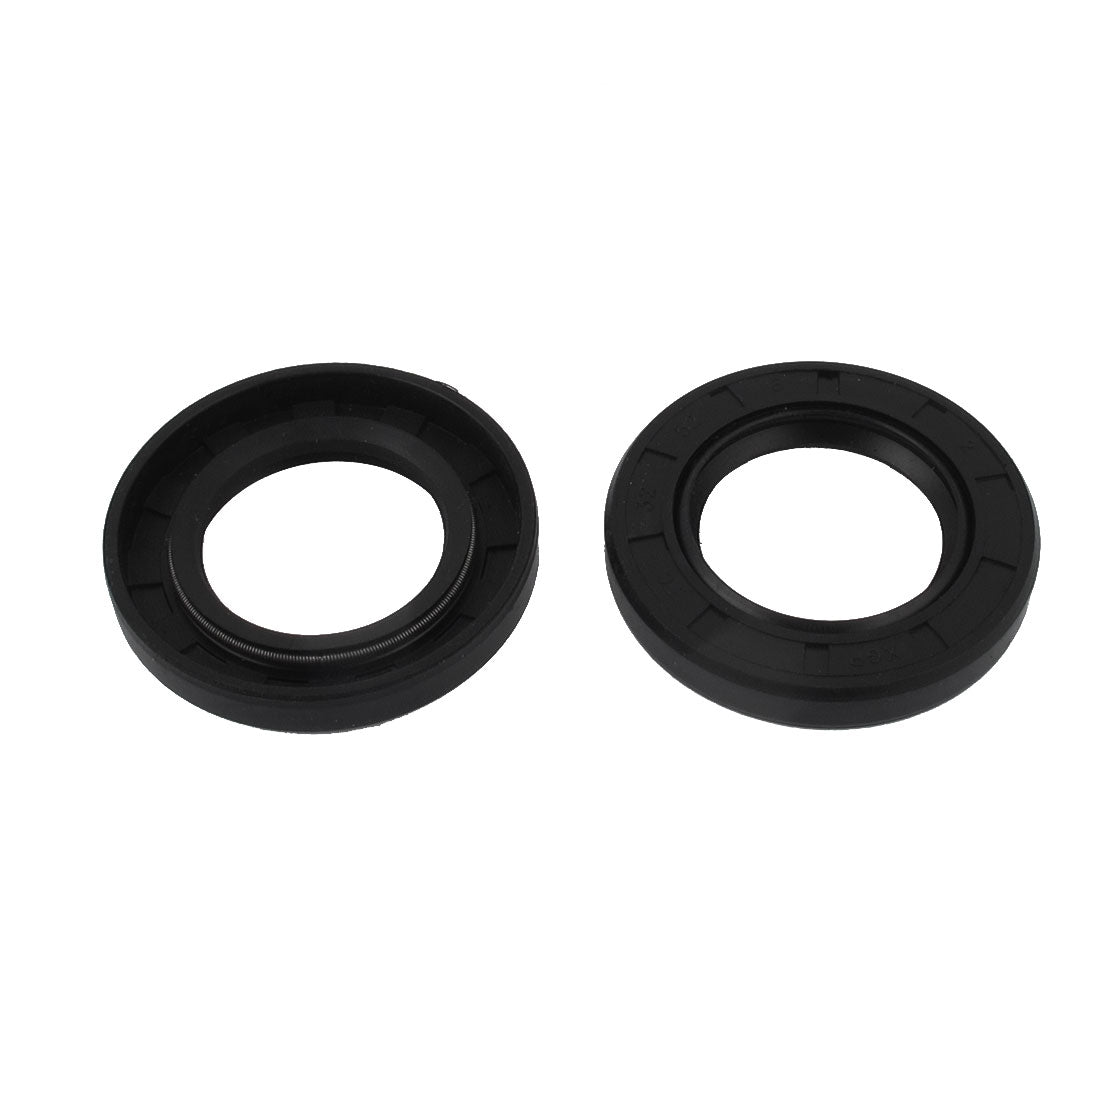 Uxcell Uxcell 2Pcs 40mm x 75mm x 12mm Rubber Oil Seal Sealing Ring Gasket Washer